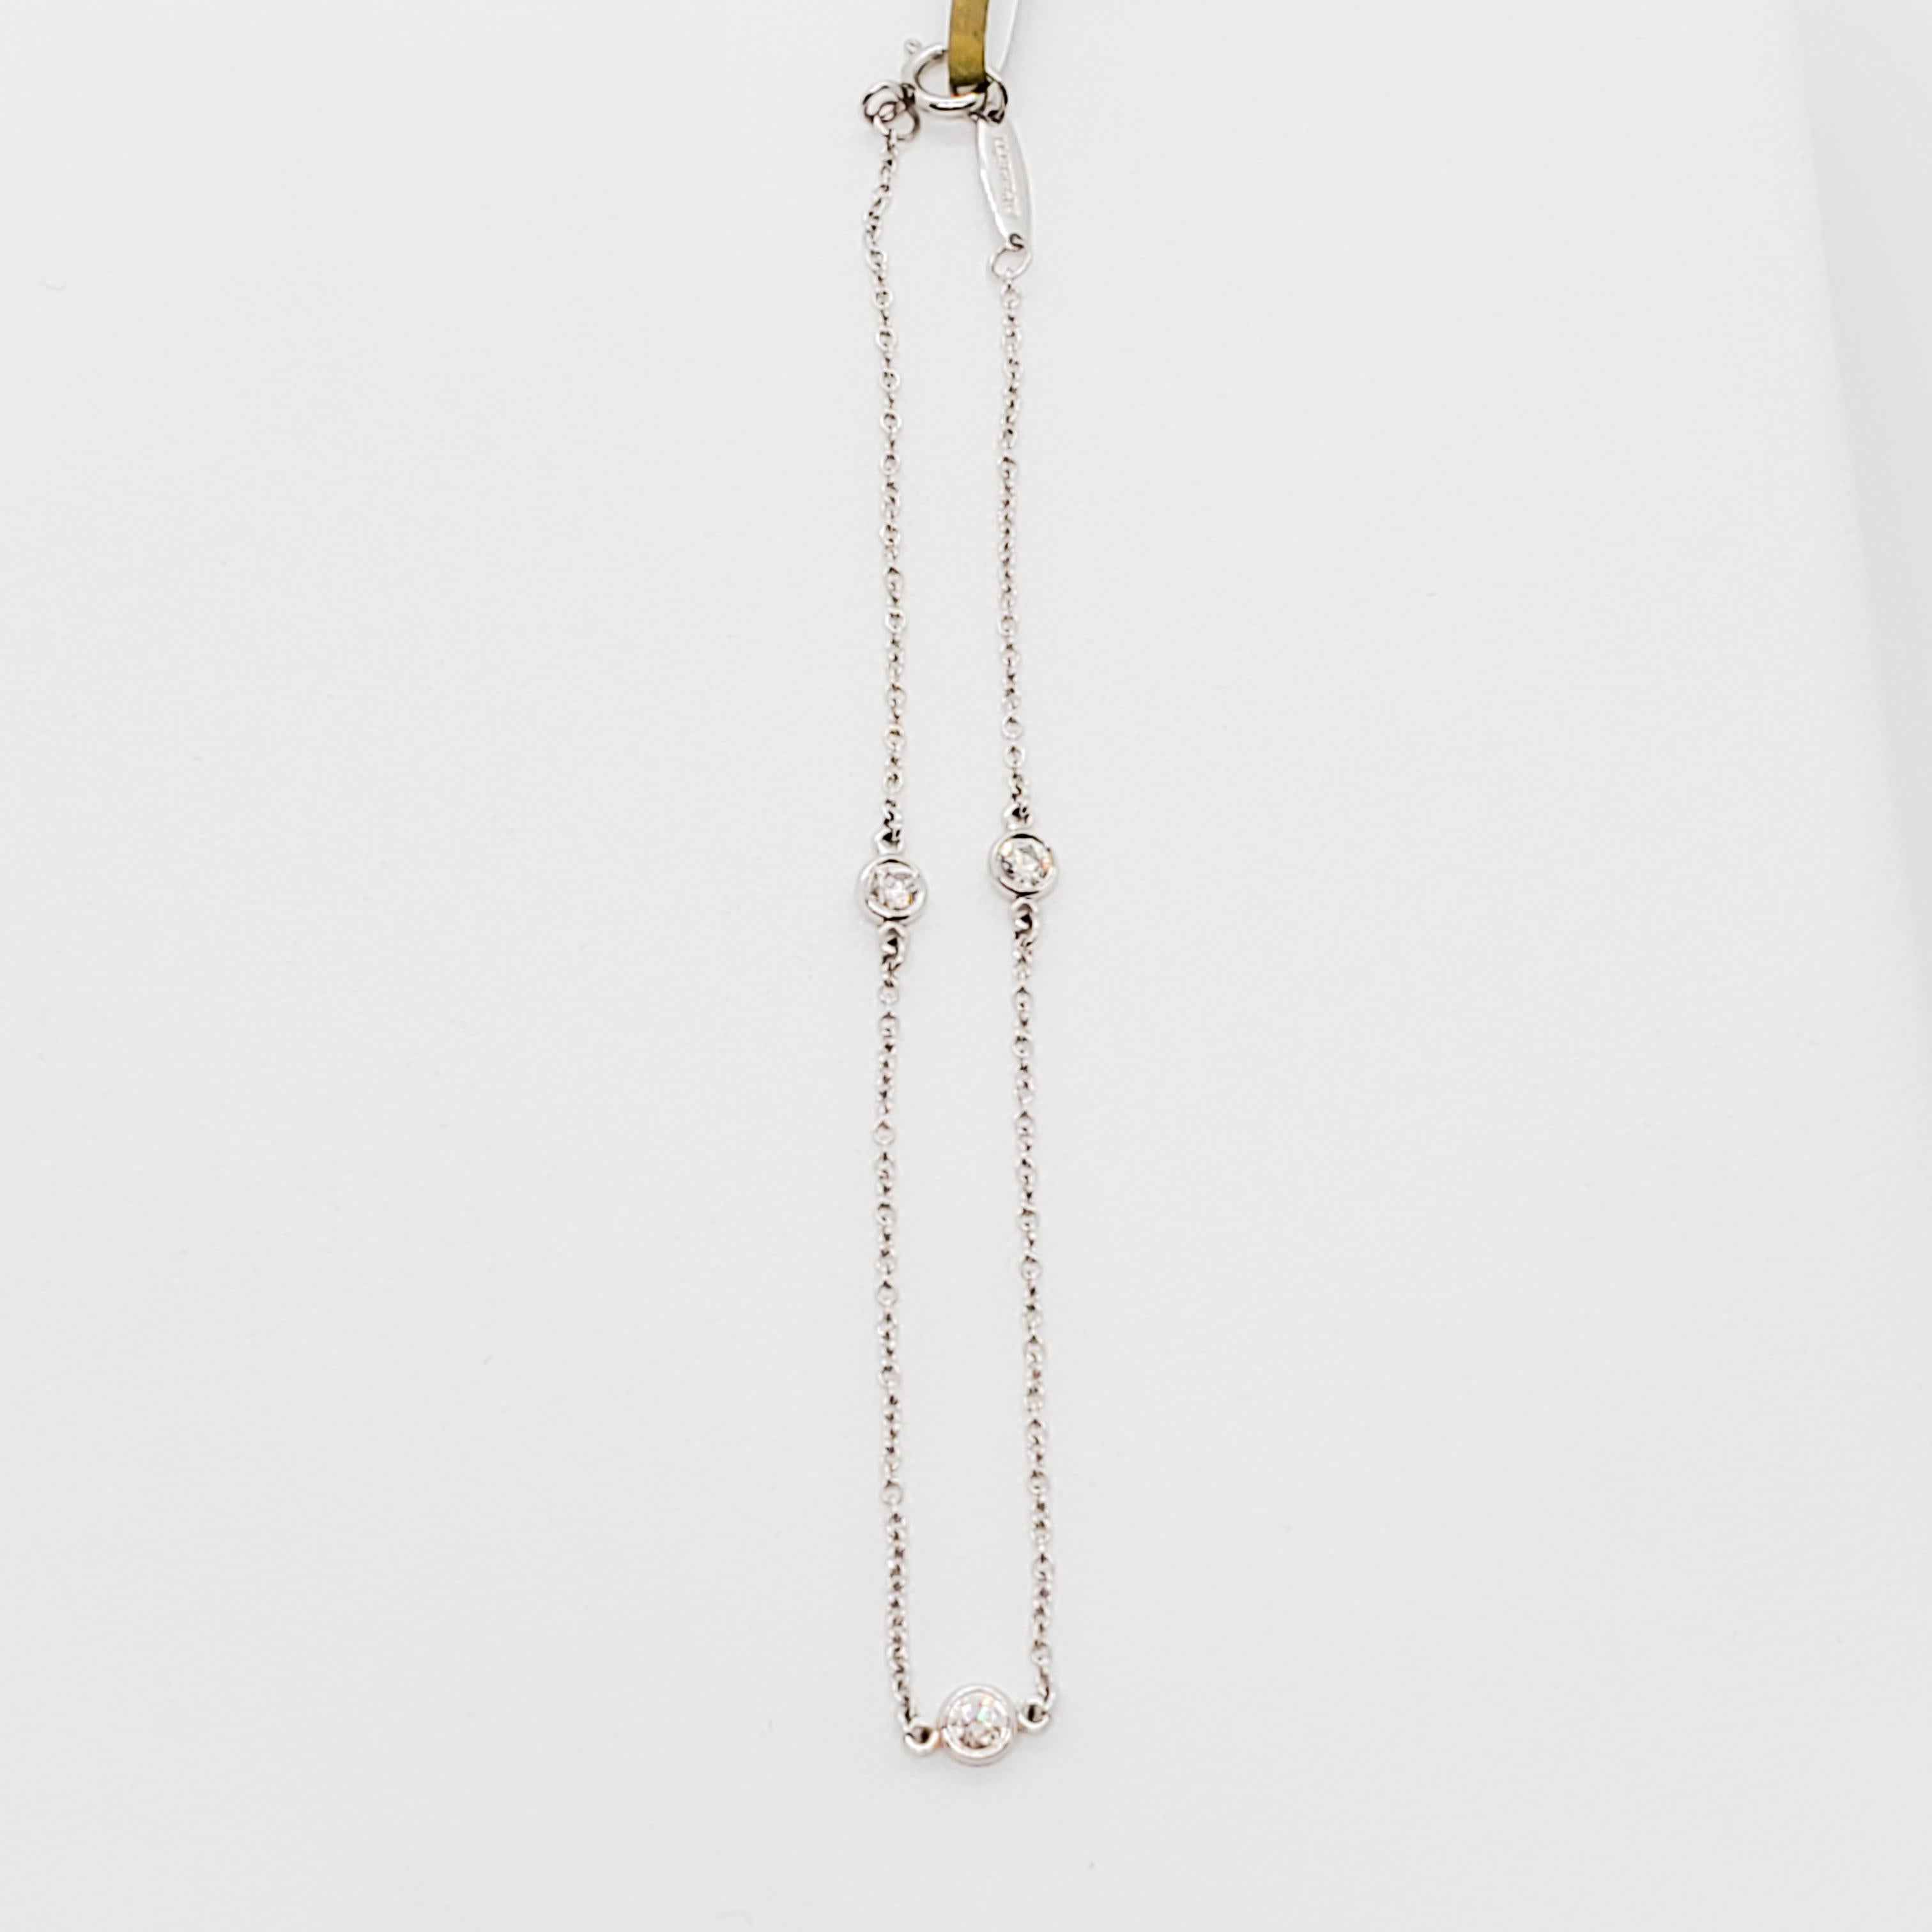 Beautiful estate Elsa Peretti for T&Co bracelet featuring 3 stones in platinum.  Simple and classic, this piece will never go out of fashion.  Length is 7